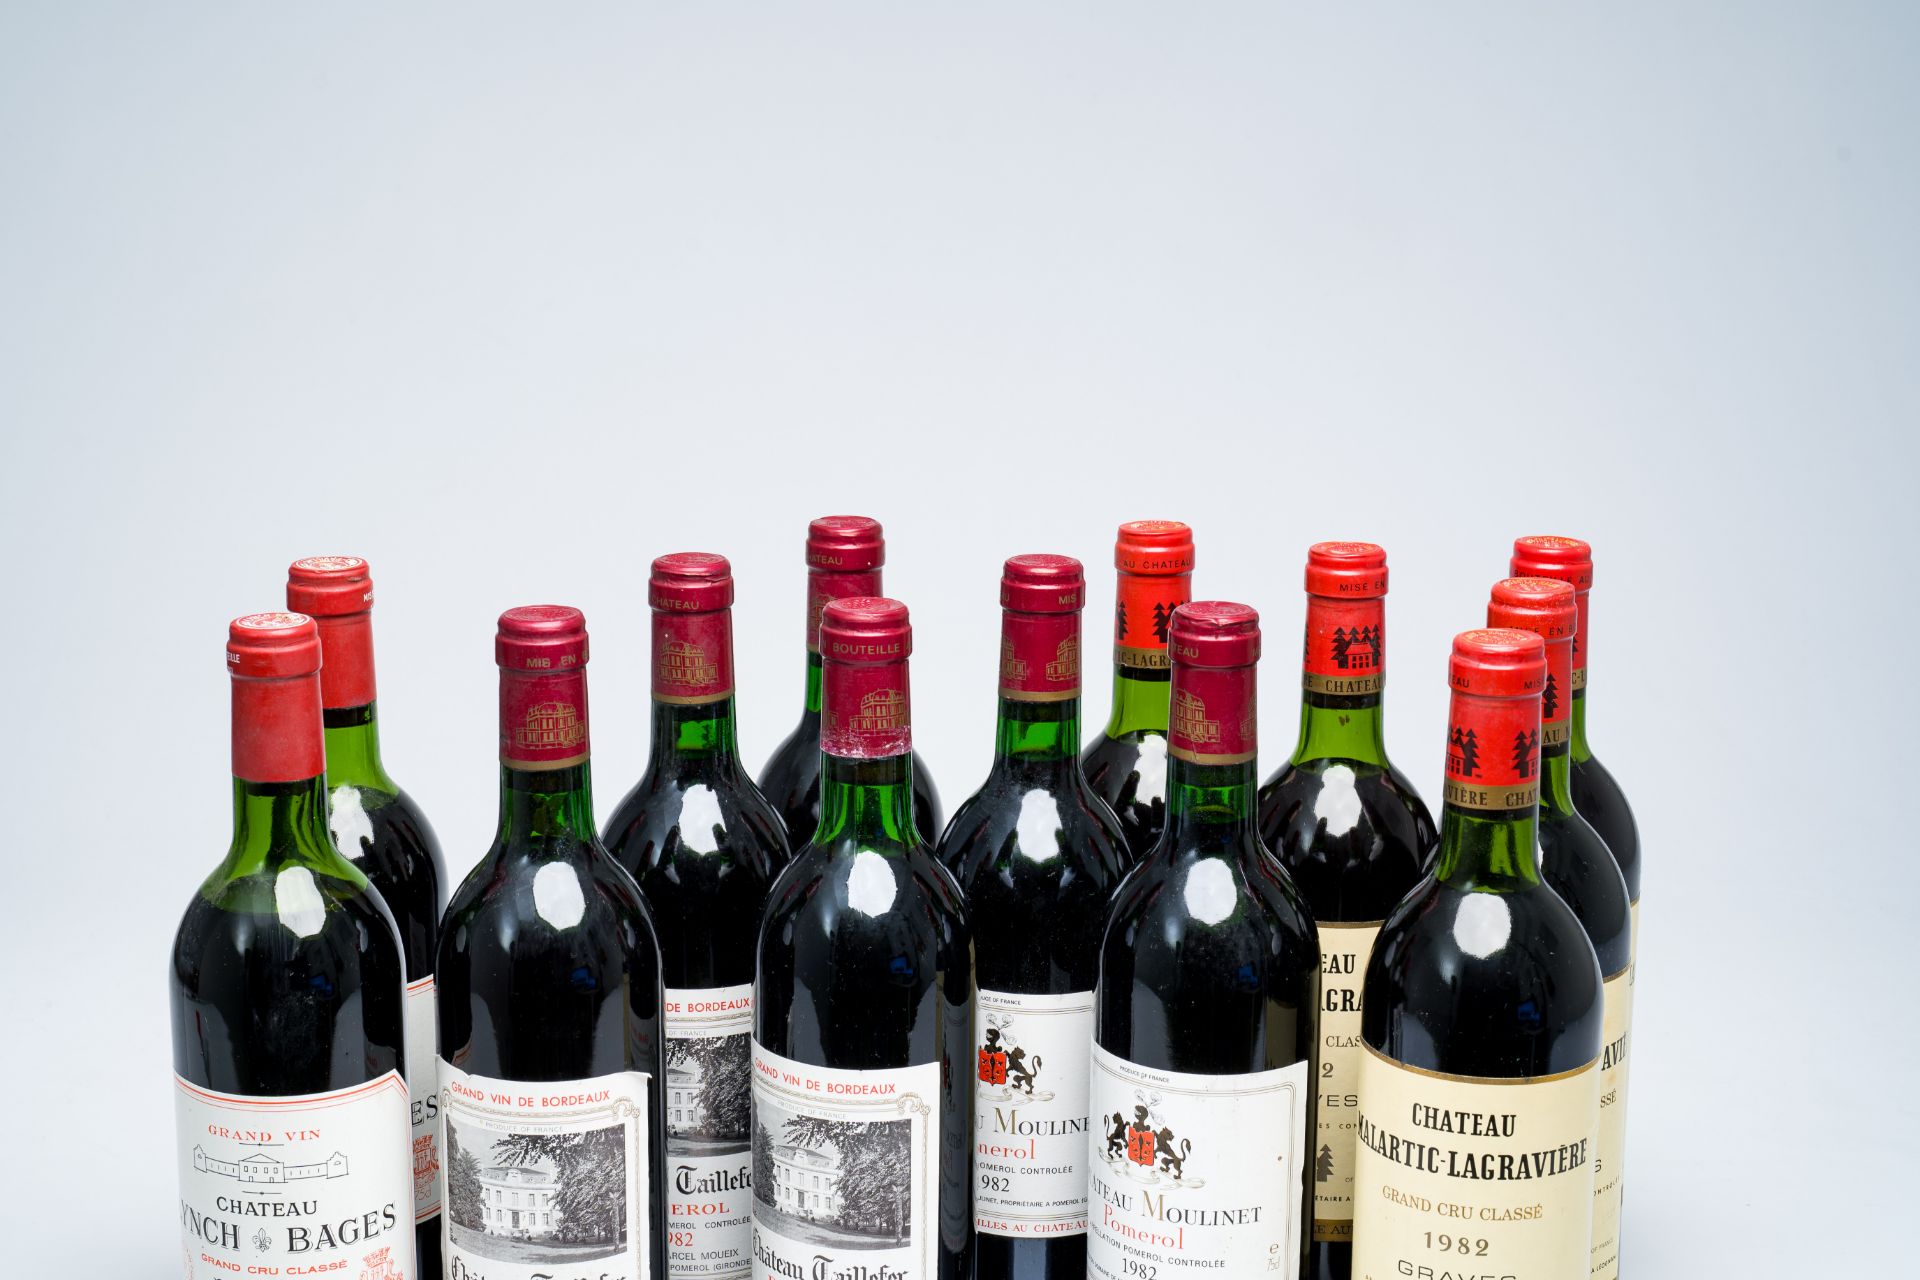 Five bottles of Chateau Malartic-Lagraviere, 4 bot. Ch. Taillefer Pomerol, 2 bot. Ch. Moulinet Pomer - Image 3 of 3